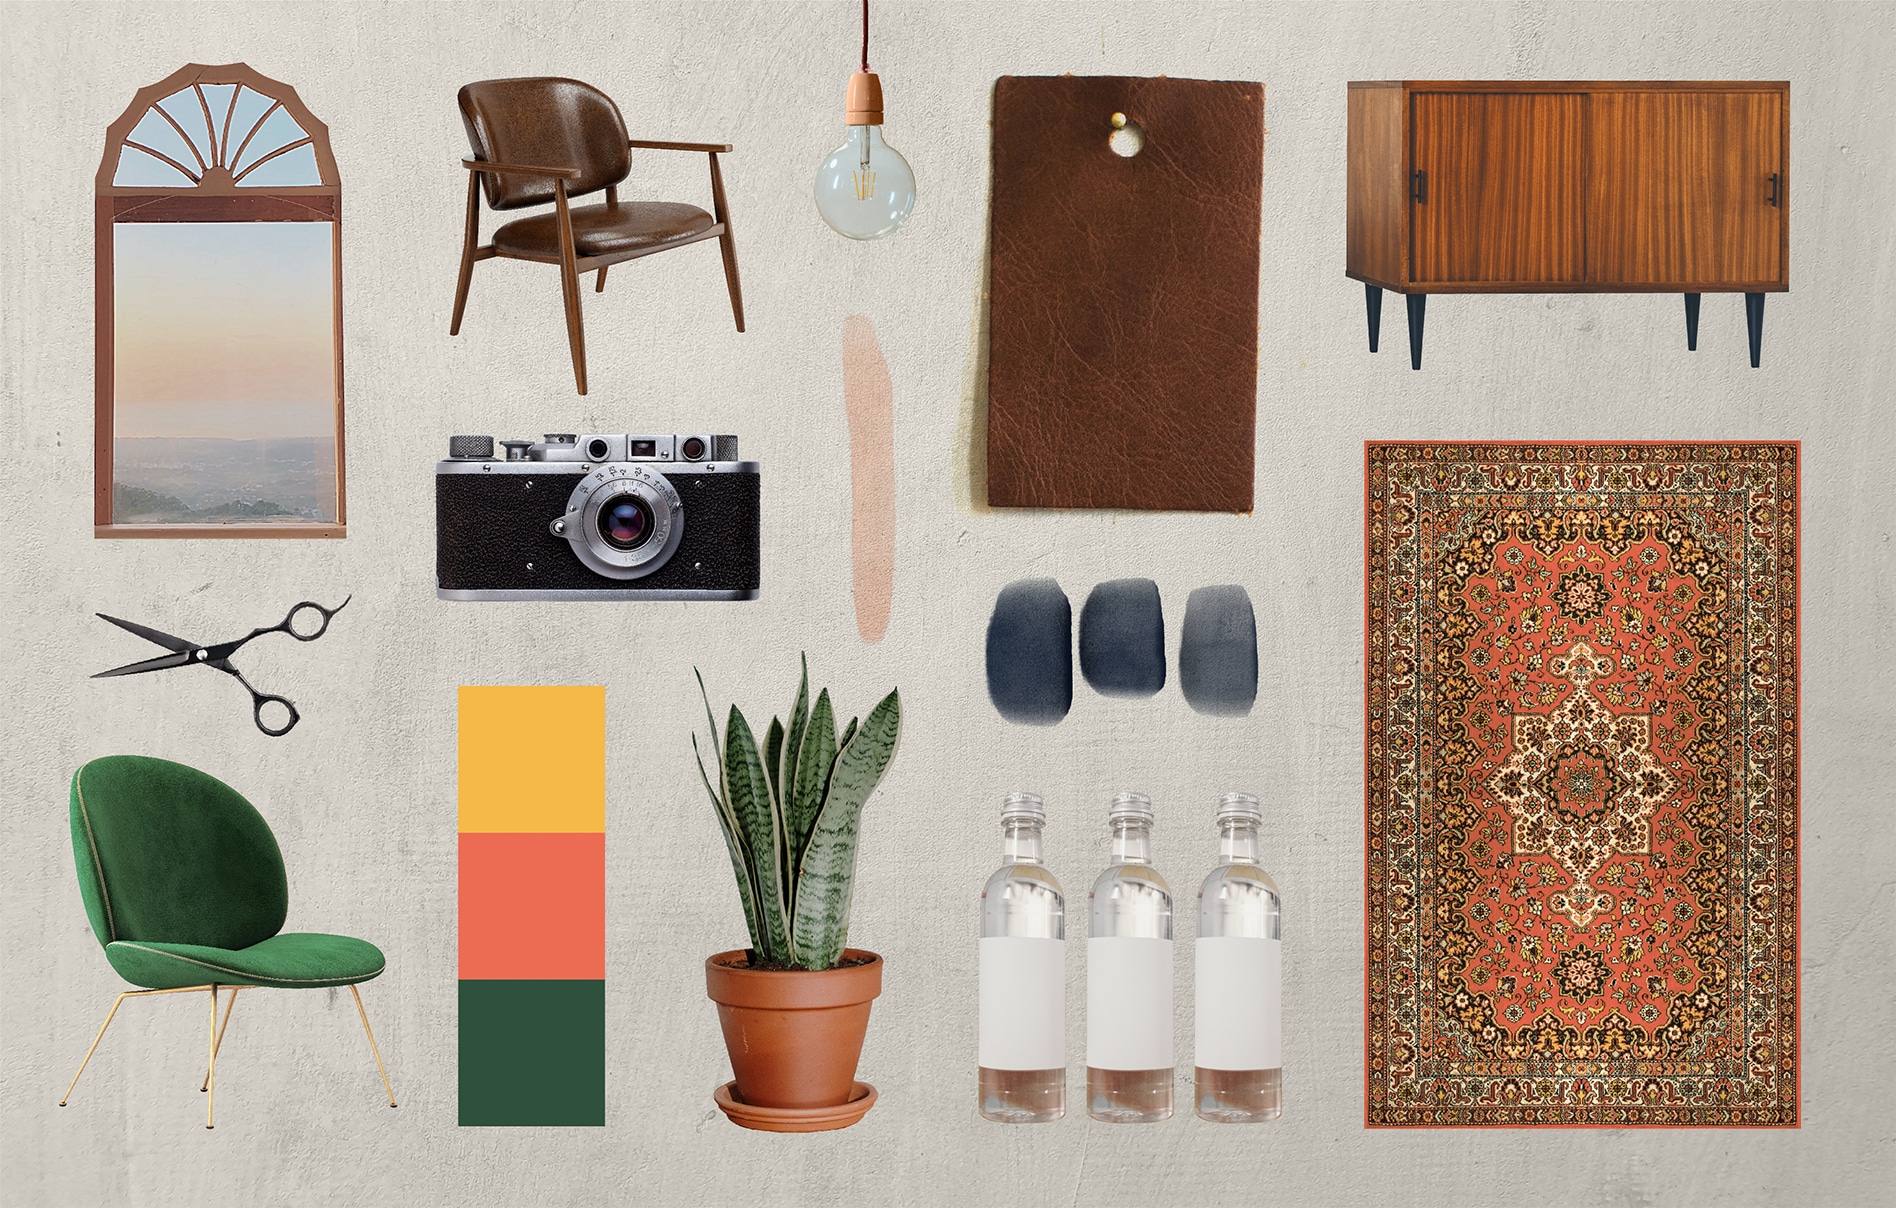 A collage of various furniture items